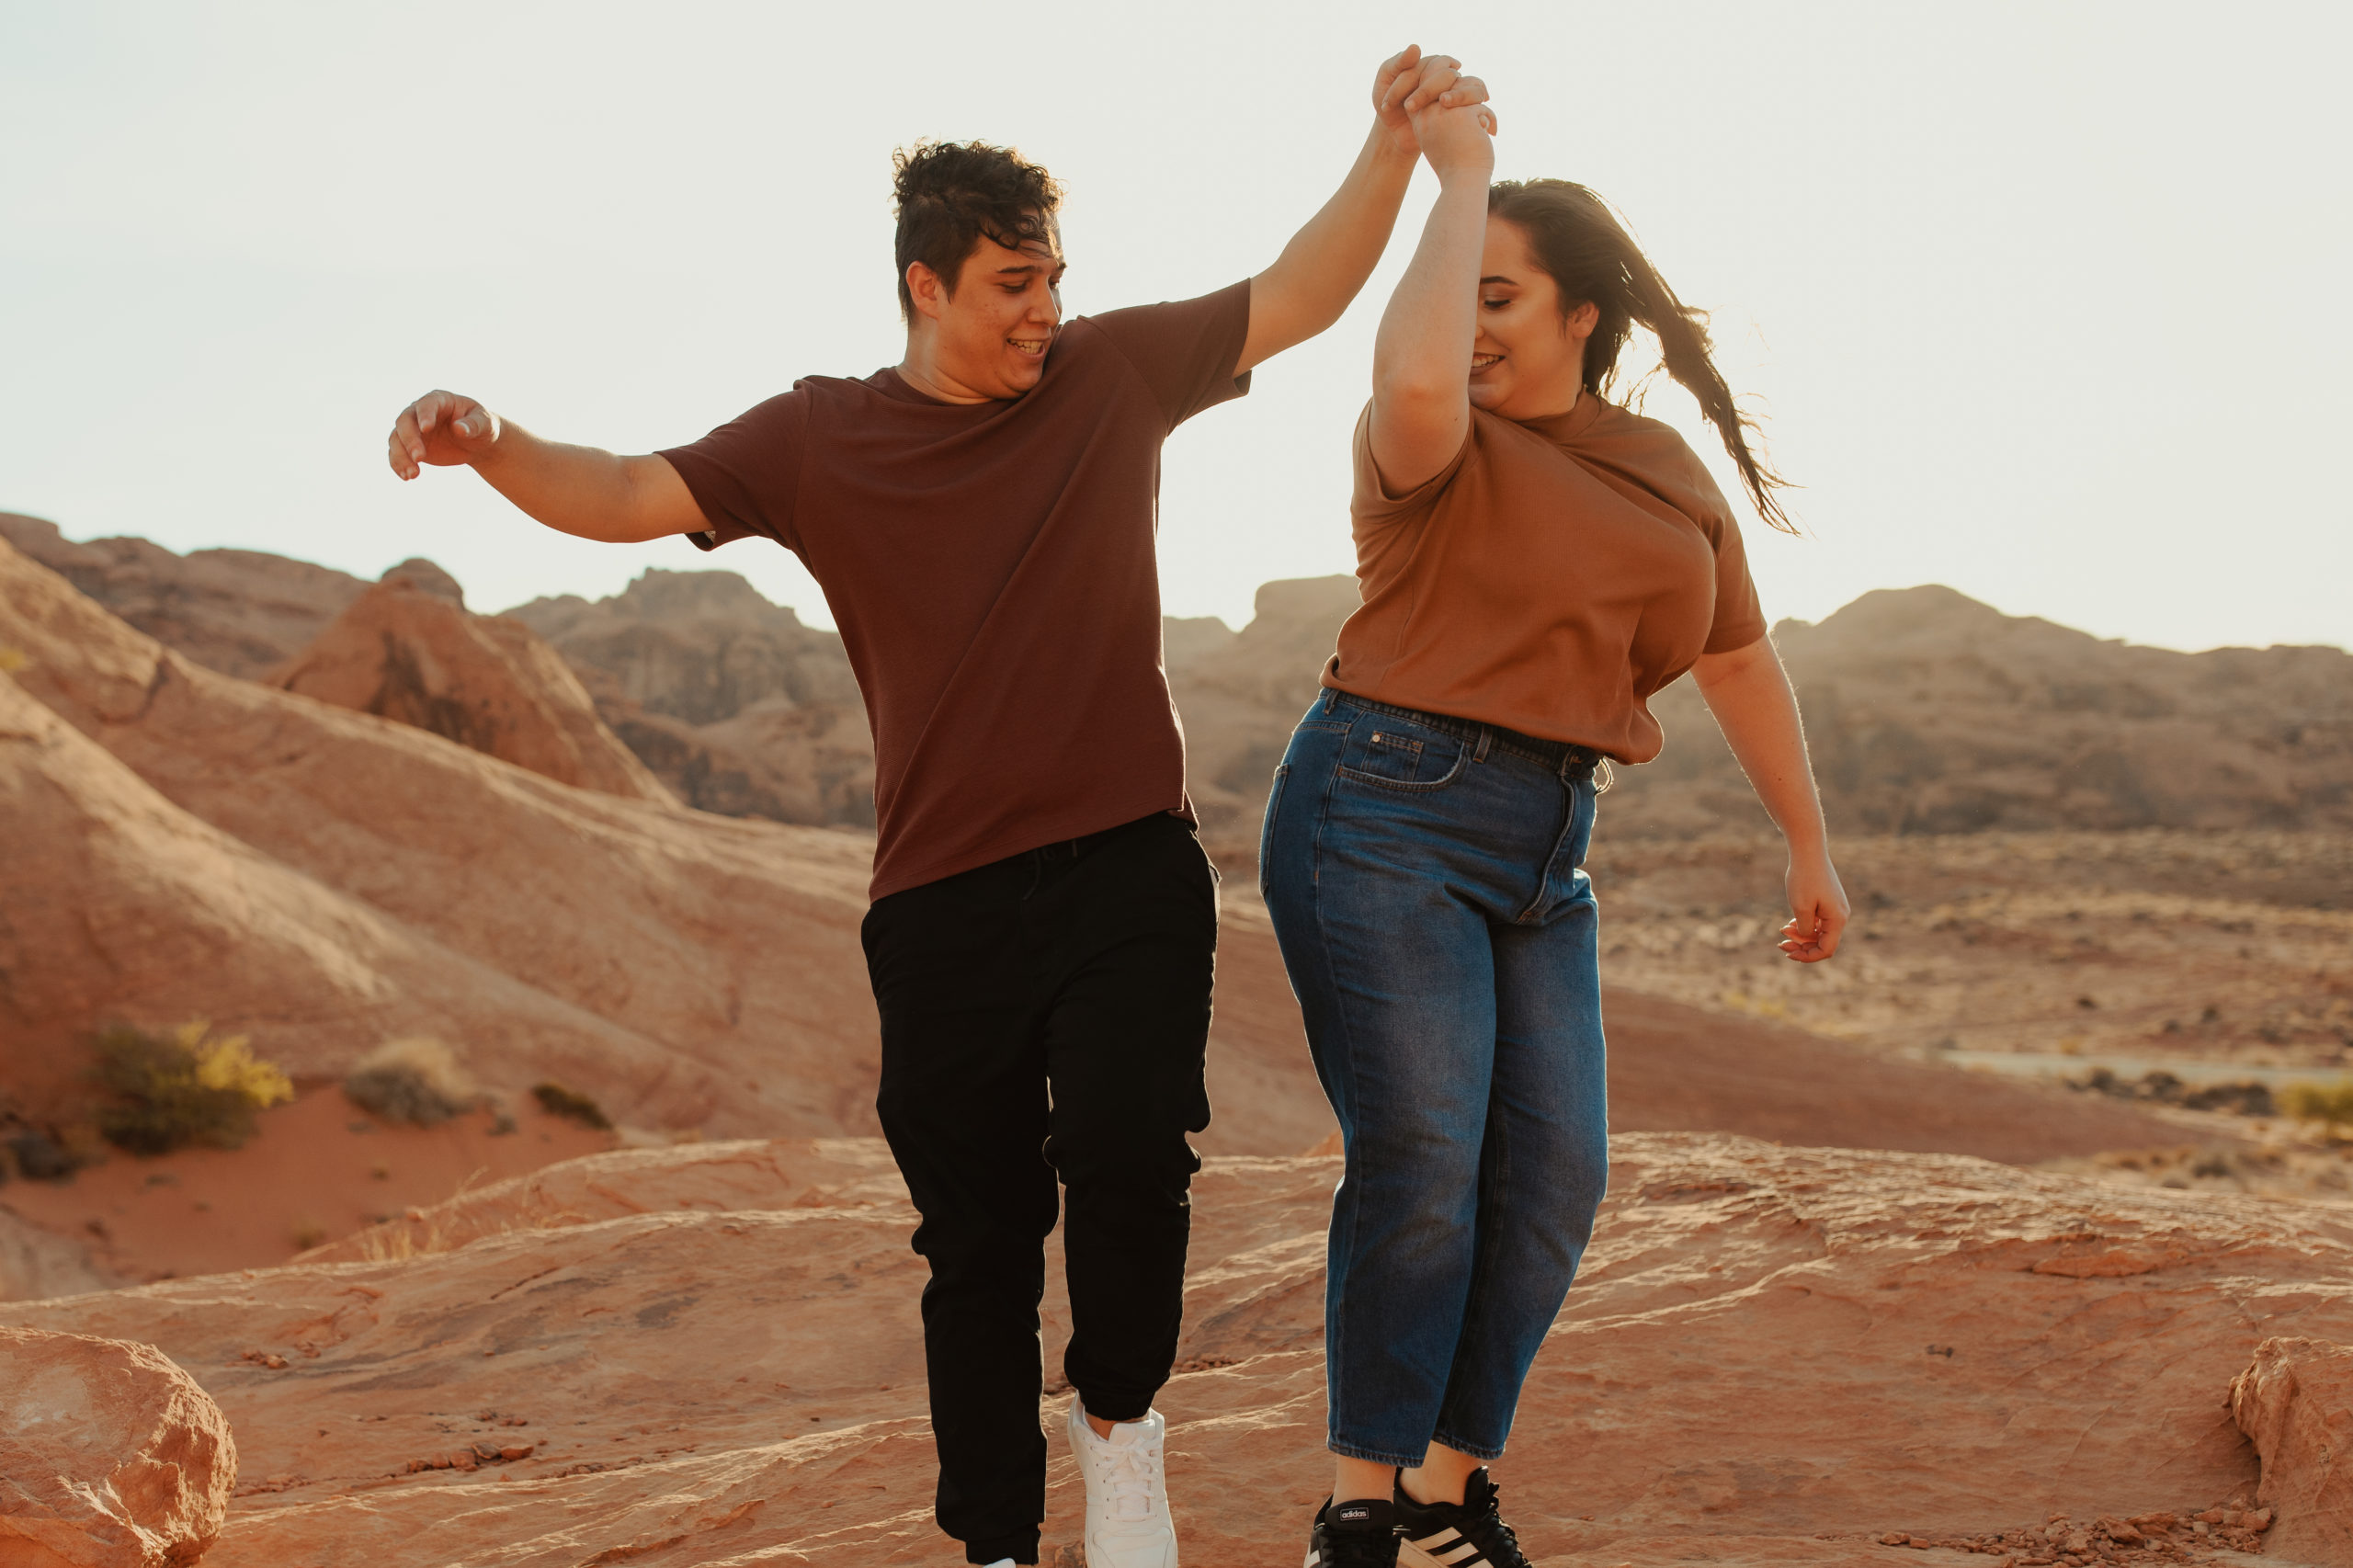 Cute couple being playful during their desert couples photoshoot